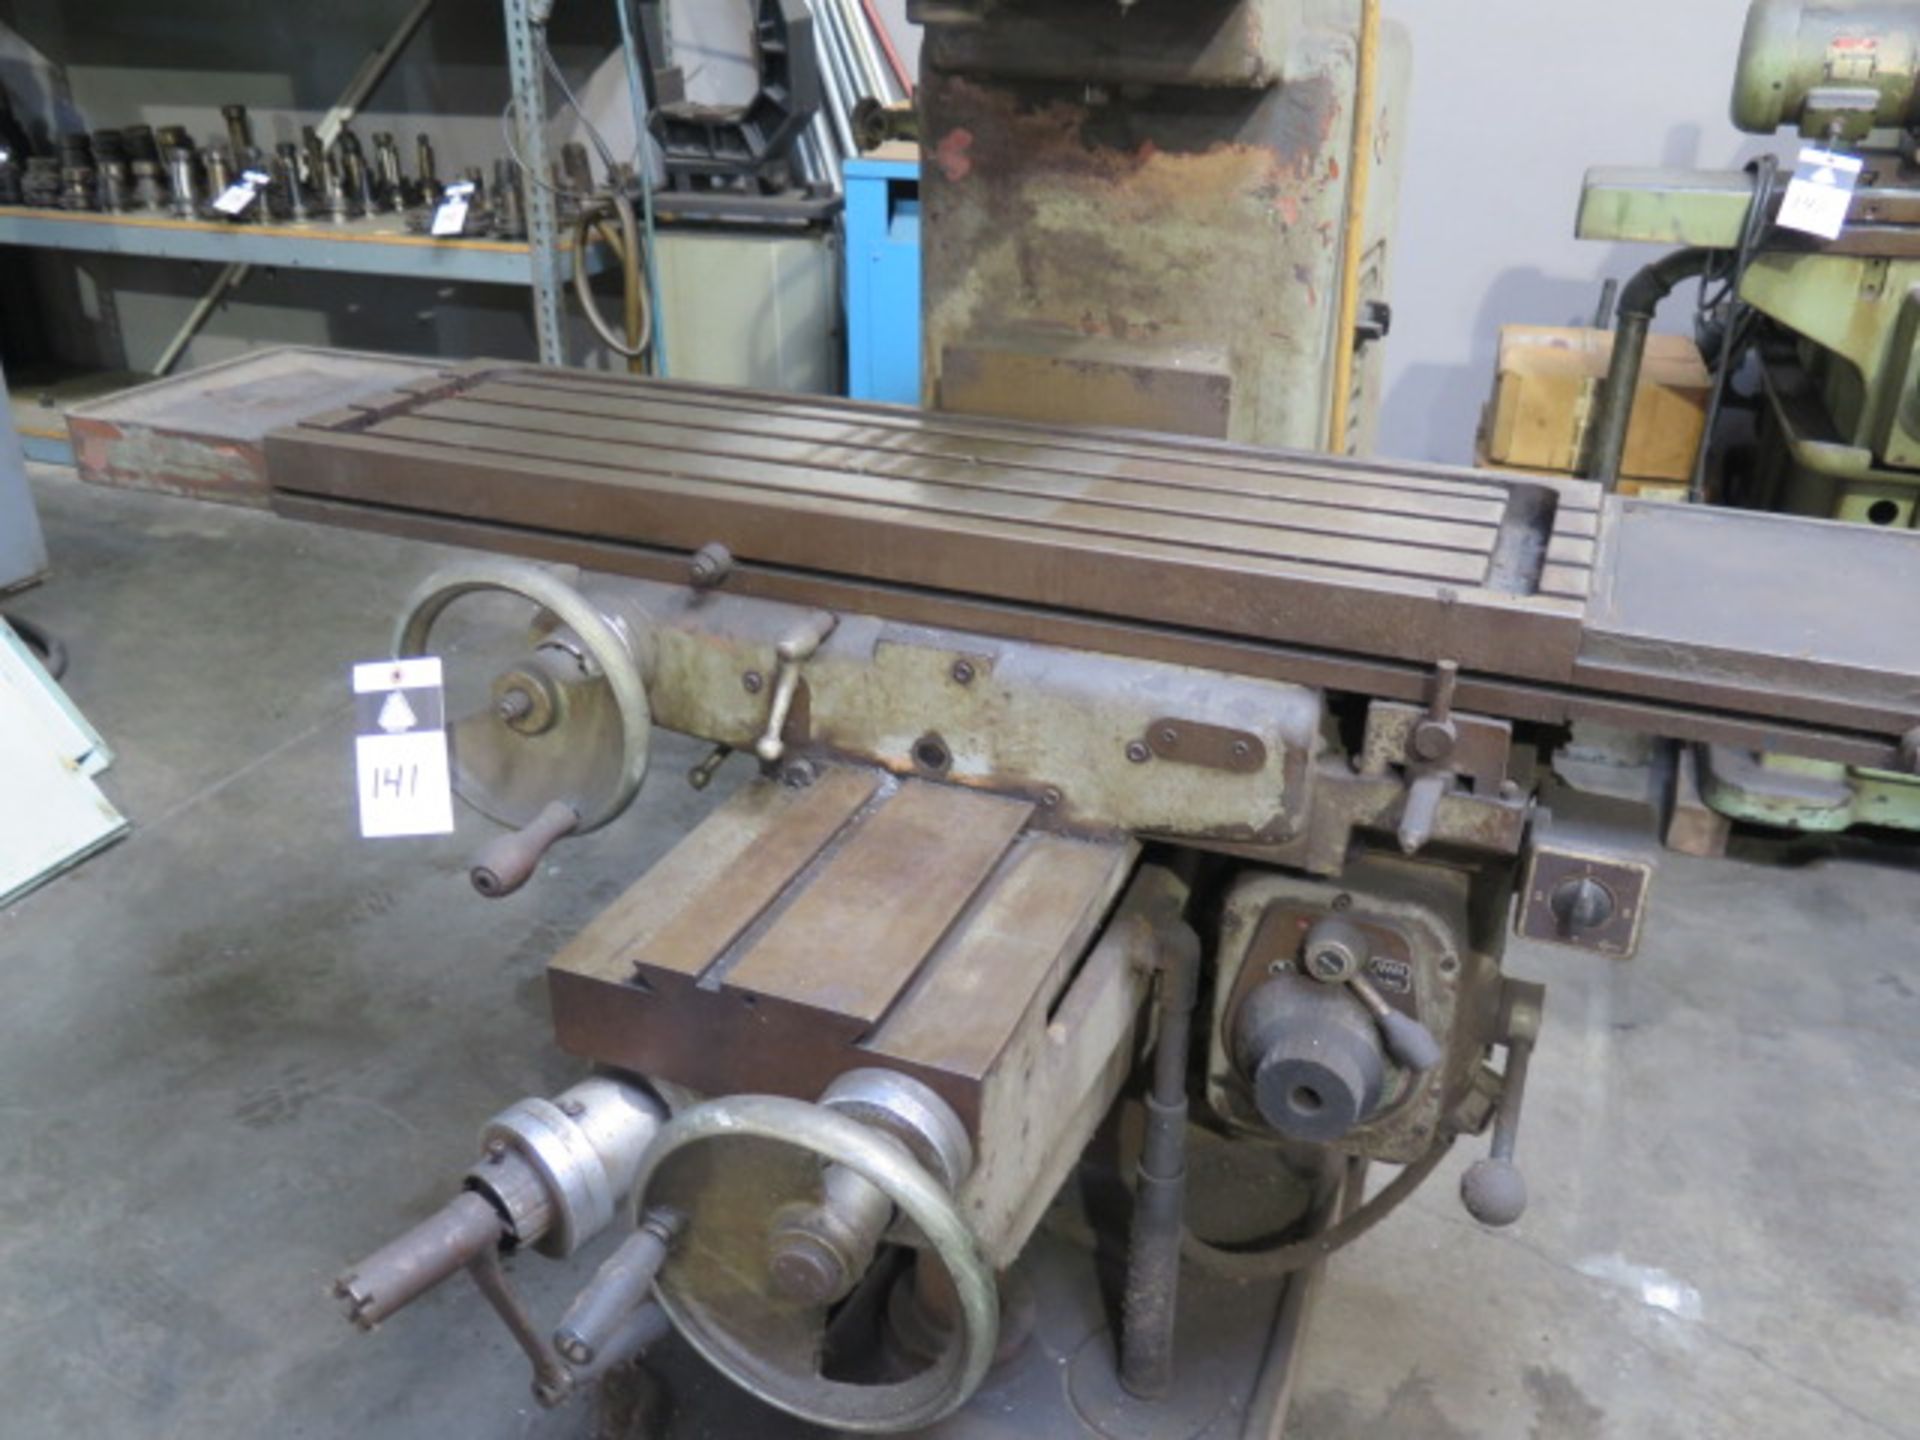 Rambaudi mdl. V2 Power Mill w/ 75-5700 RPM, 16-Speeds, R8 Spindle, PF, 12” x 52” Table SOLD AS IS - Image 4 of 5